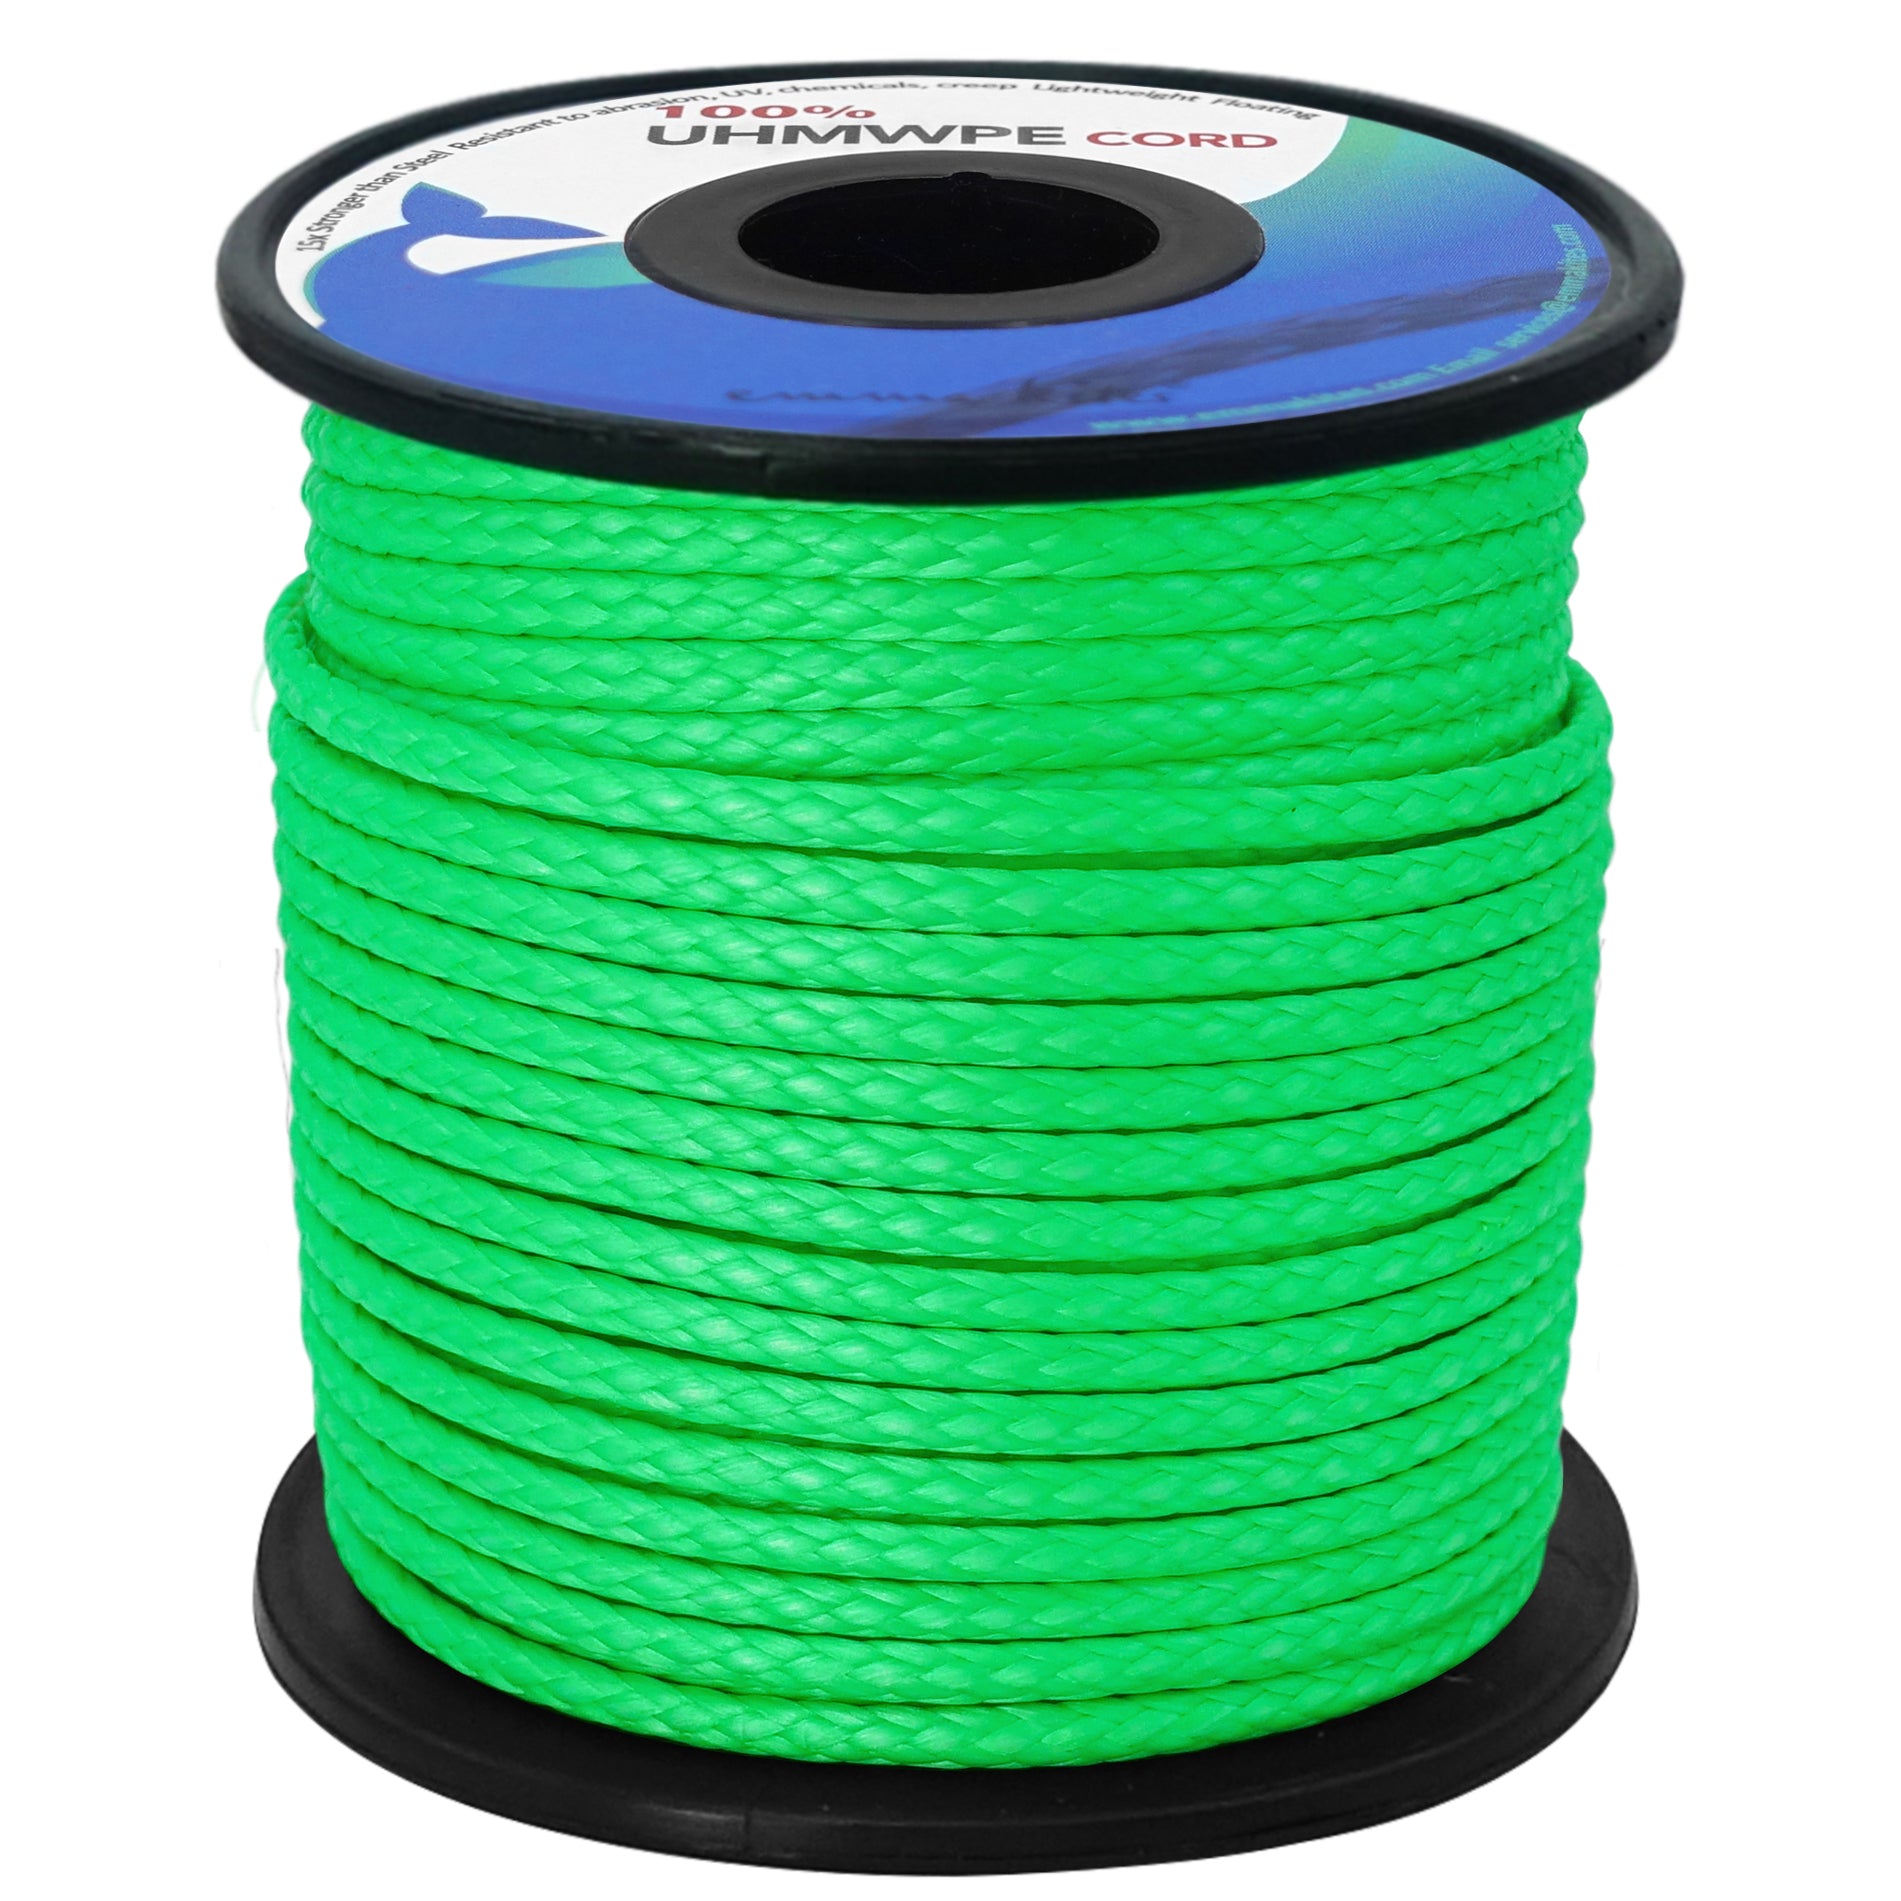 Braided Green Line for Fishing on a Transparent Coil, Isolate, Close-up  Stock Image - Image of black, nylon: 277083653